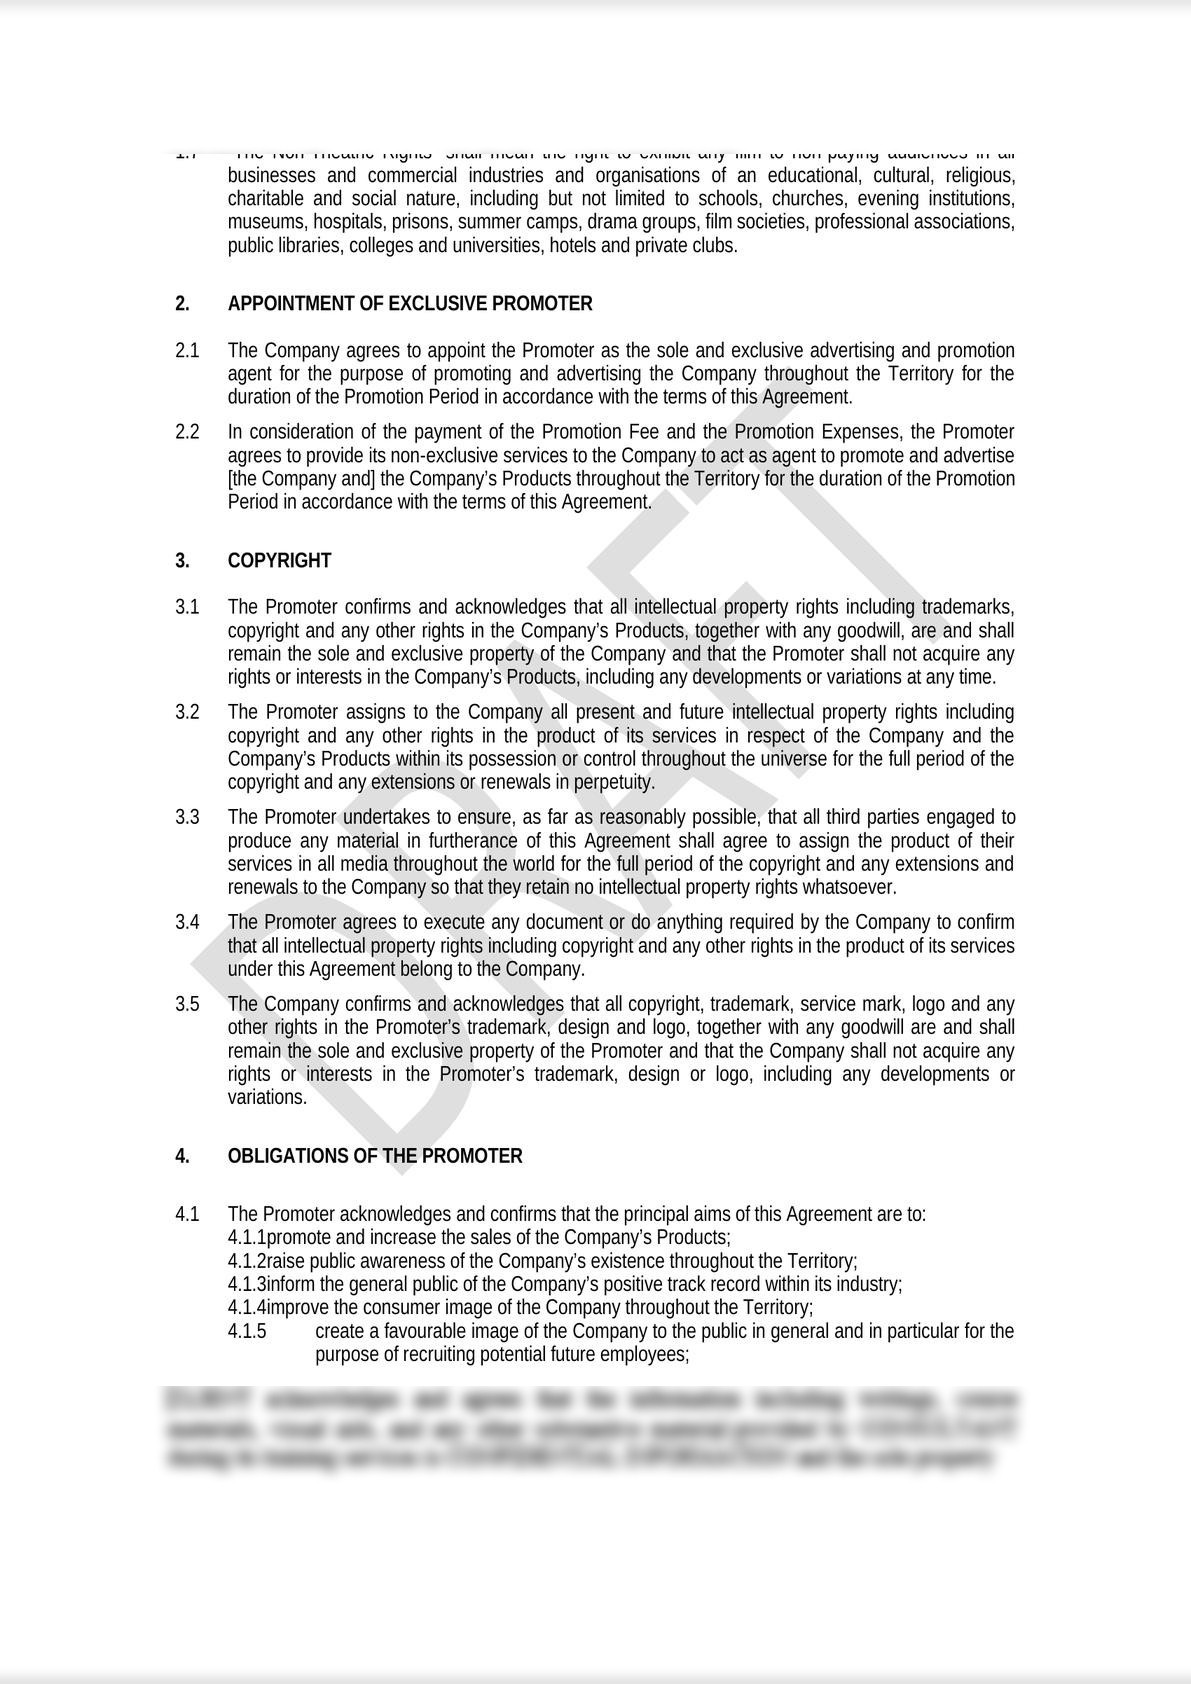 General Advertising & Promotion Agreement (Media Law)-0